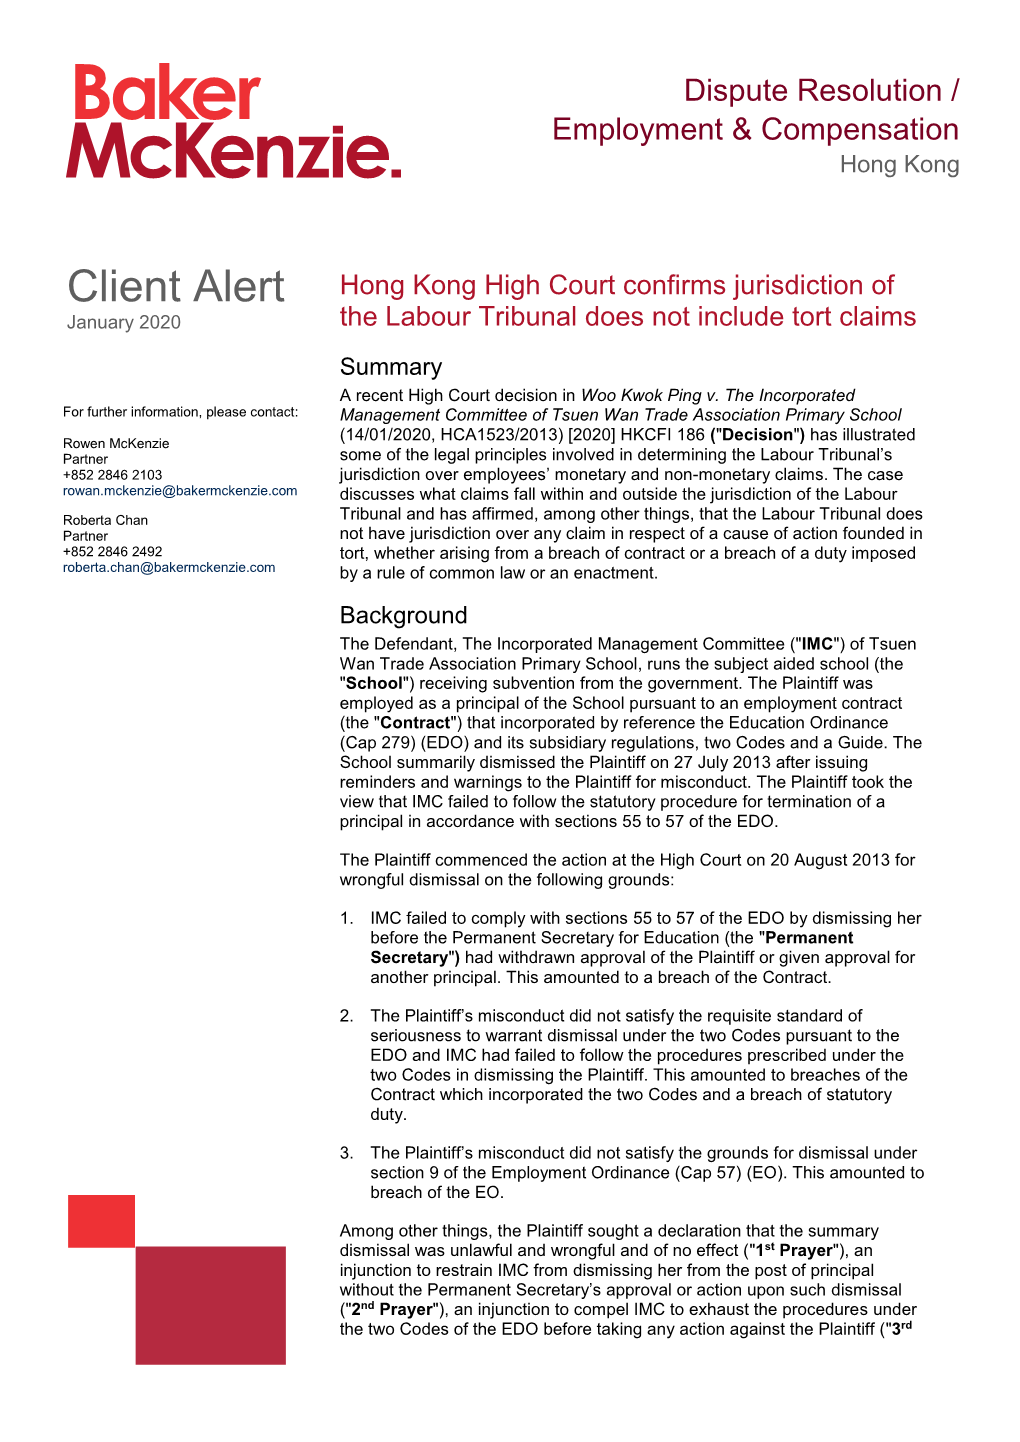 Client Alert Hong Kong High Court Confirms Jurisdiction of January 2020 the Labour Tribunal Does Not Include Tort Claims